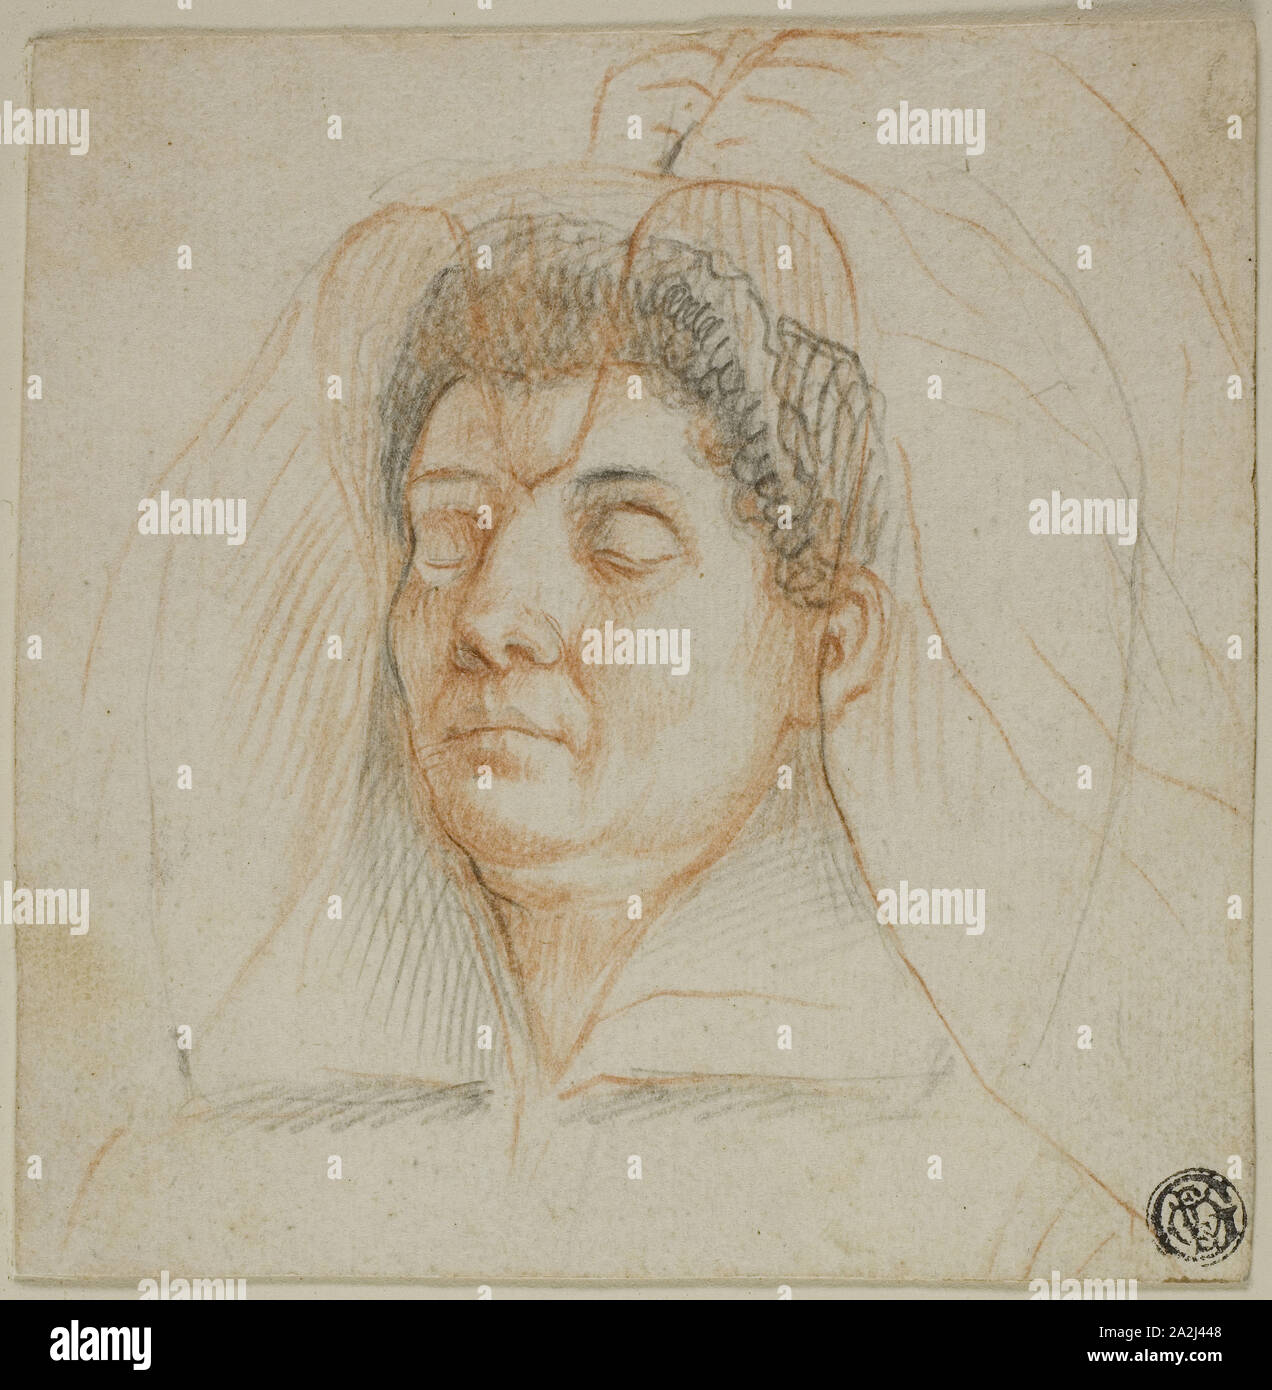 Death Mask of a Woman, c. 1605, Circle of Lavinia Fontana, Italian, 1552-1614, Italy, Black and red chalk, on ivory laid paper, laid down on ivory wove paper, 129 x 127 mm (max Stock Photo